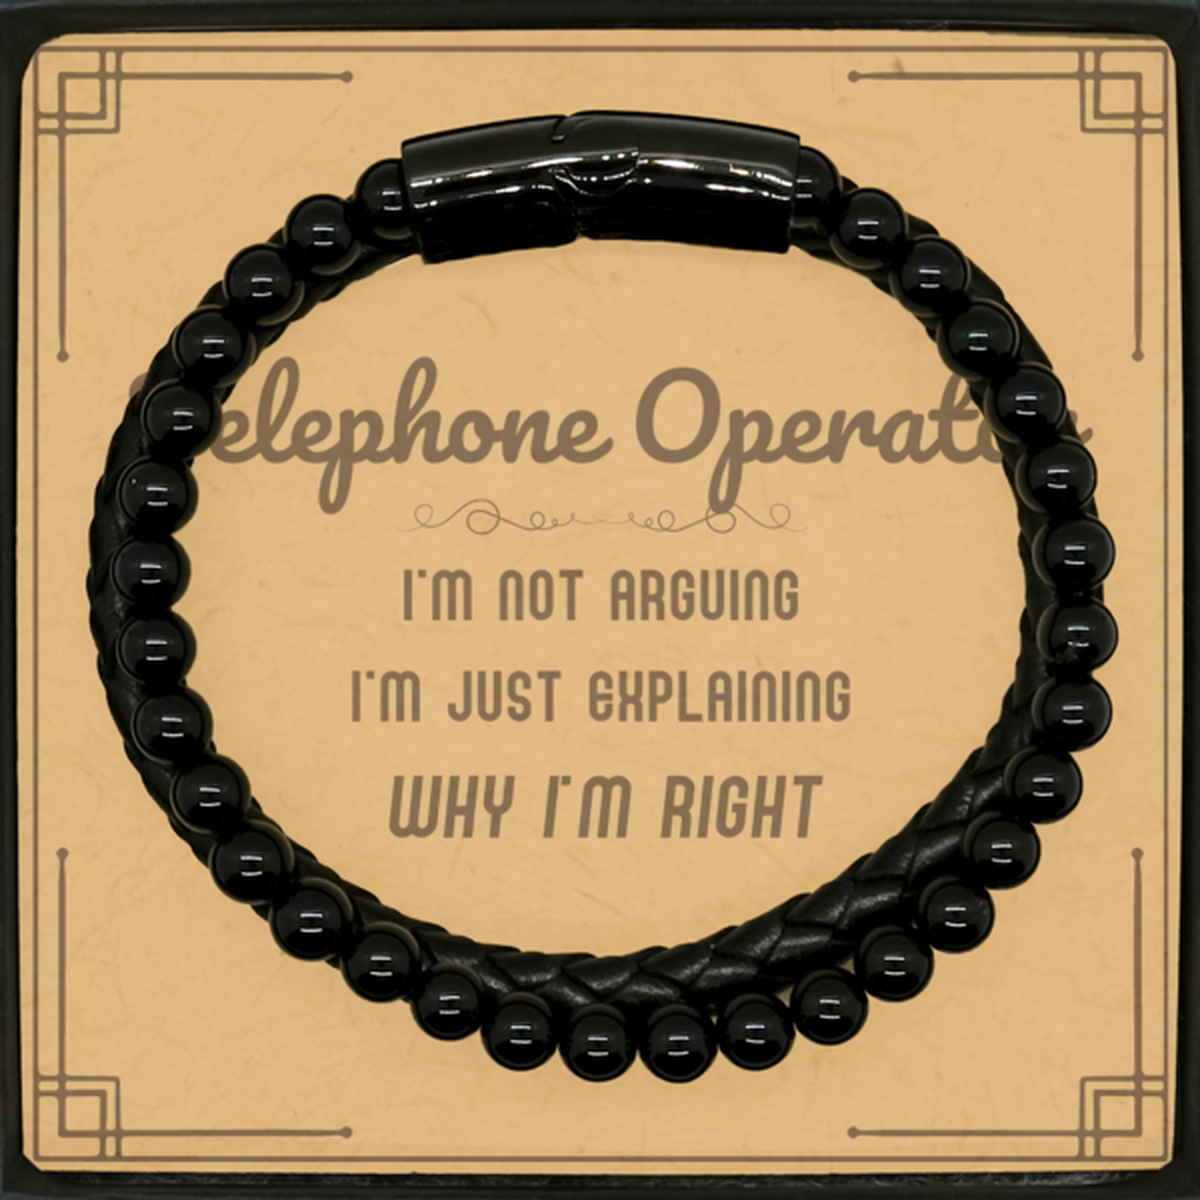 Telephone Operator I'm not Arguing. I'm Just Explaining Why I'm RIGHT Stone Leather Bracelets, Funny Saying Quote Telephone Operator Gifts For Telephone Operator Message Card Graduation Birthday Christmas Gifts for Men Women Coworker